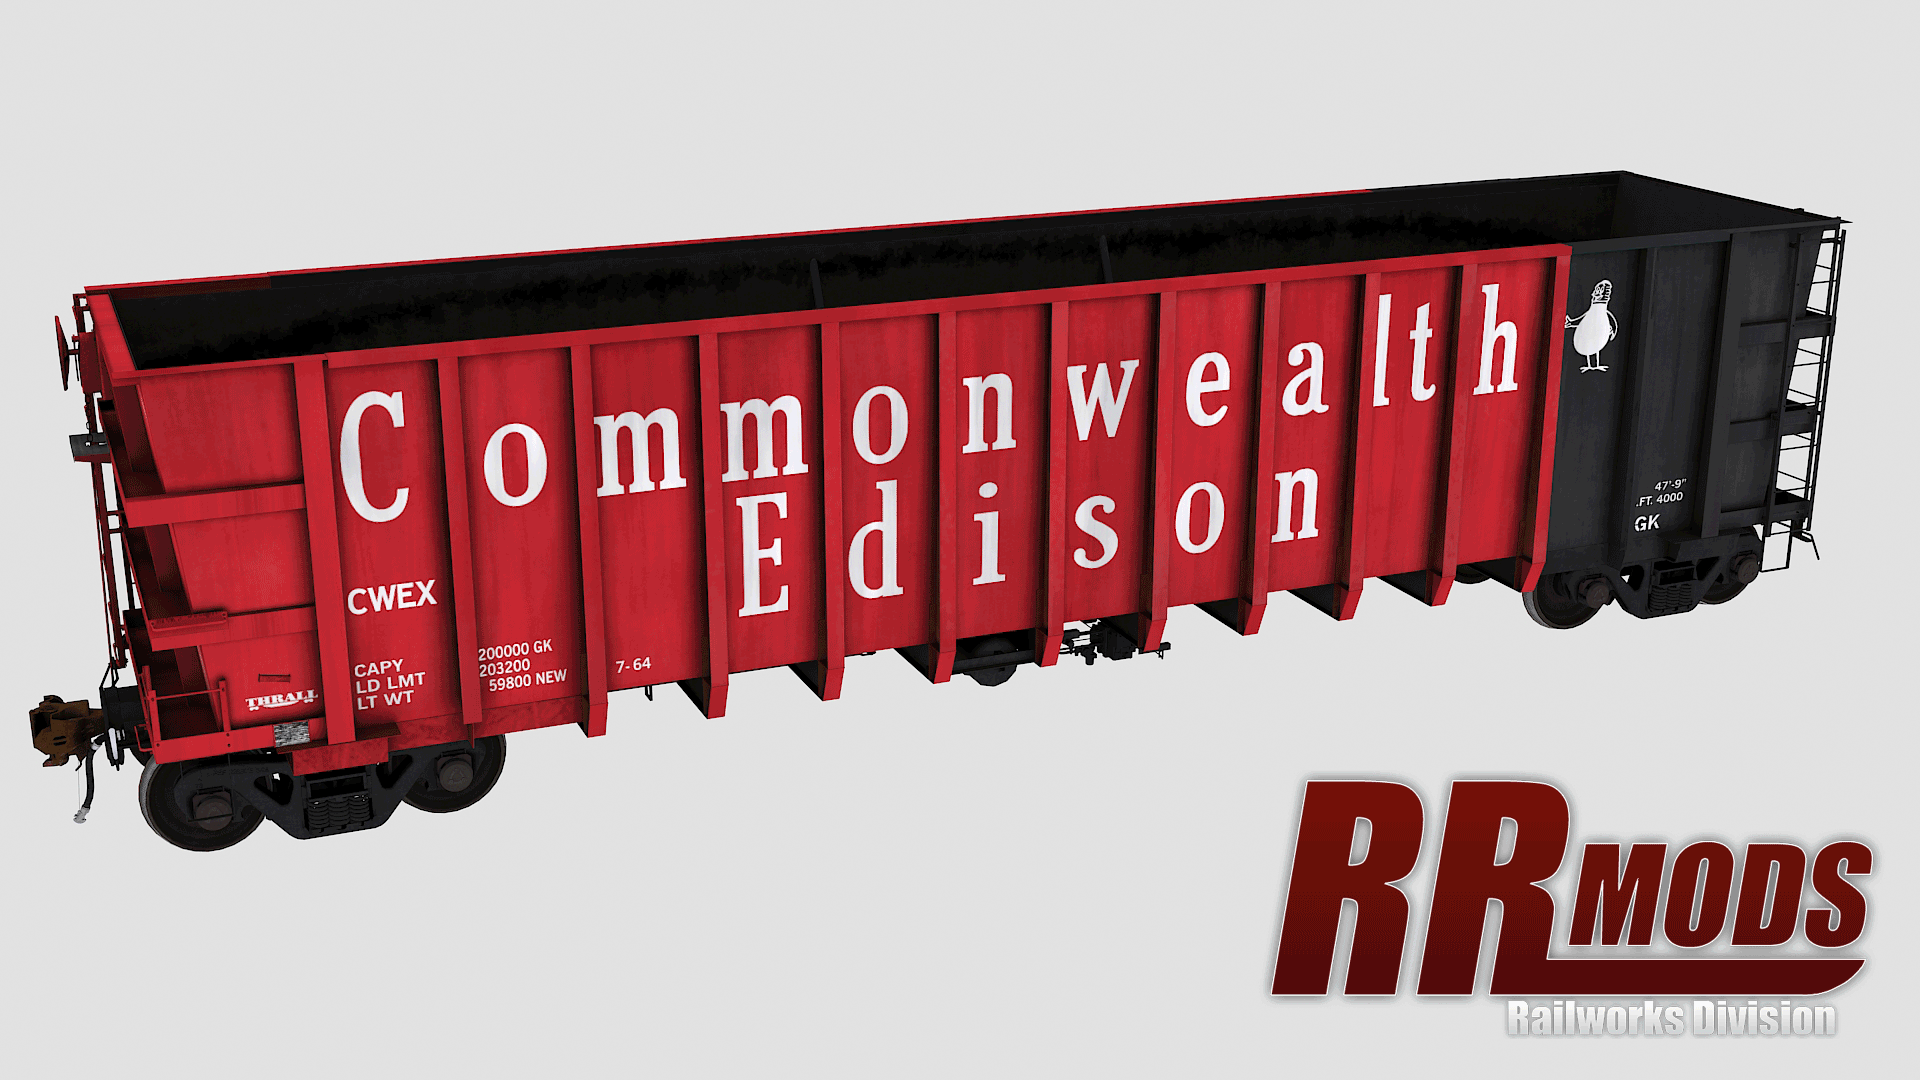 The common wealth edison is a product of RRMODS